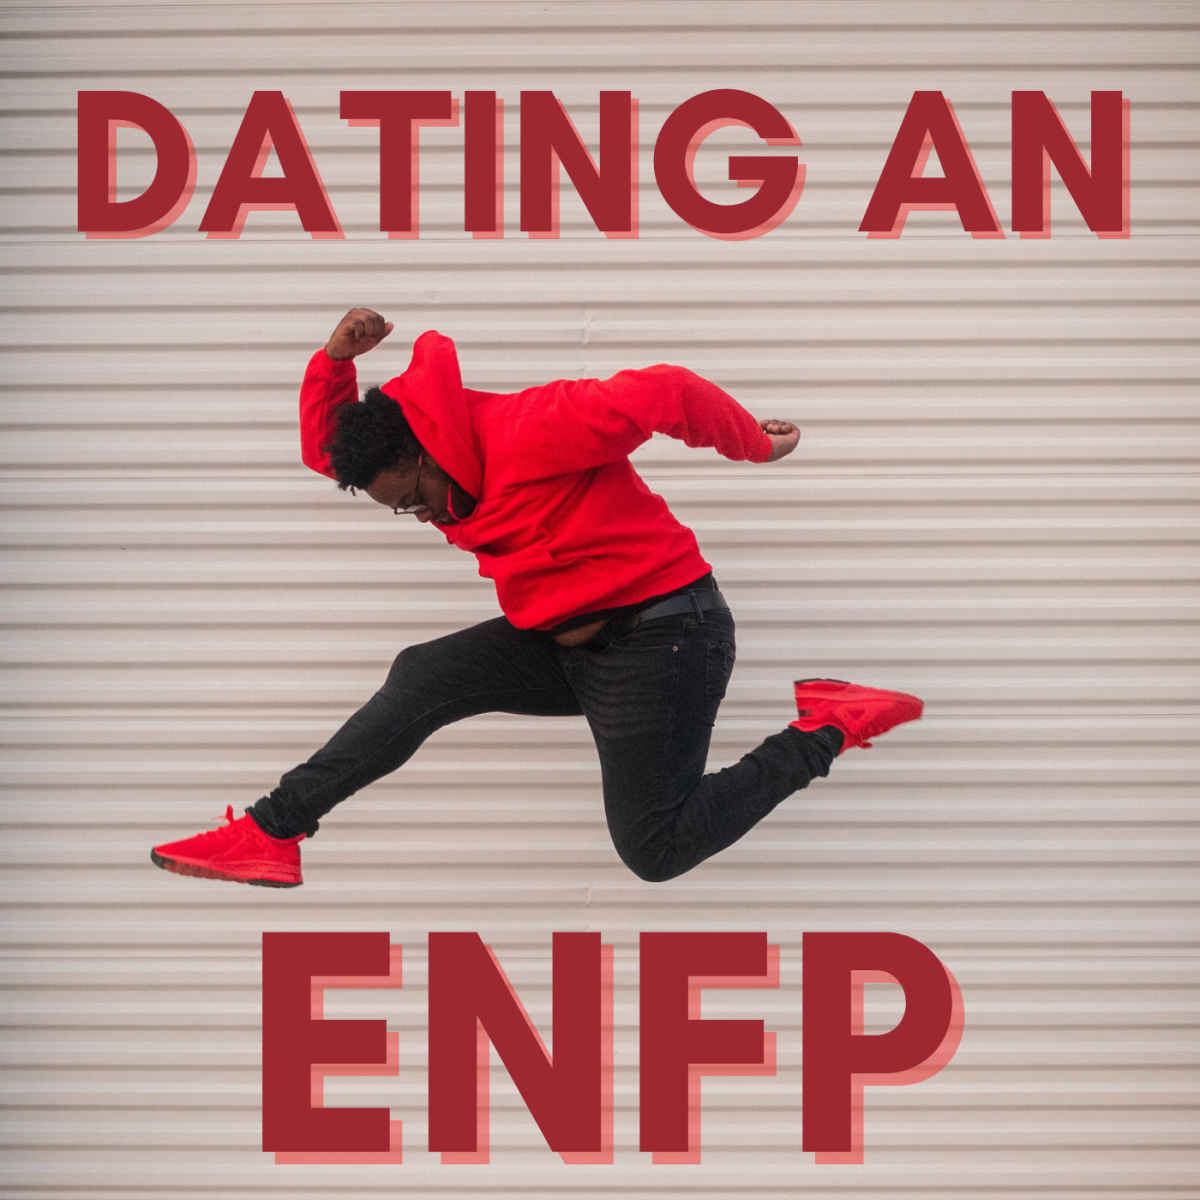 If you're crushing on an ENFP, prepare for a creative, open-minded, family-loving partner.